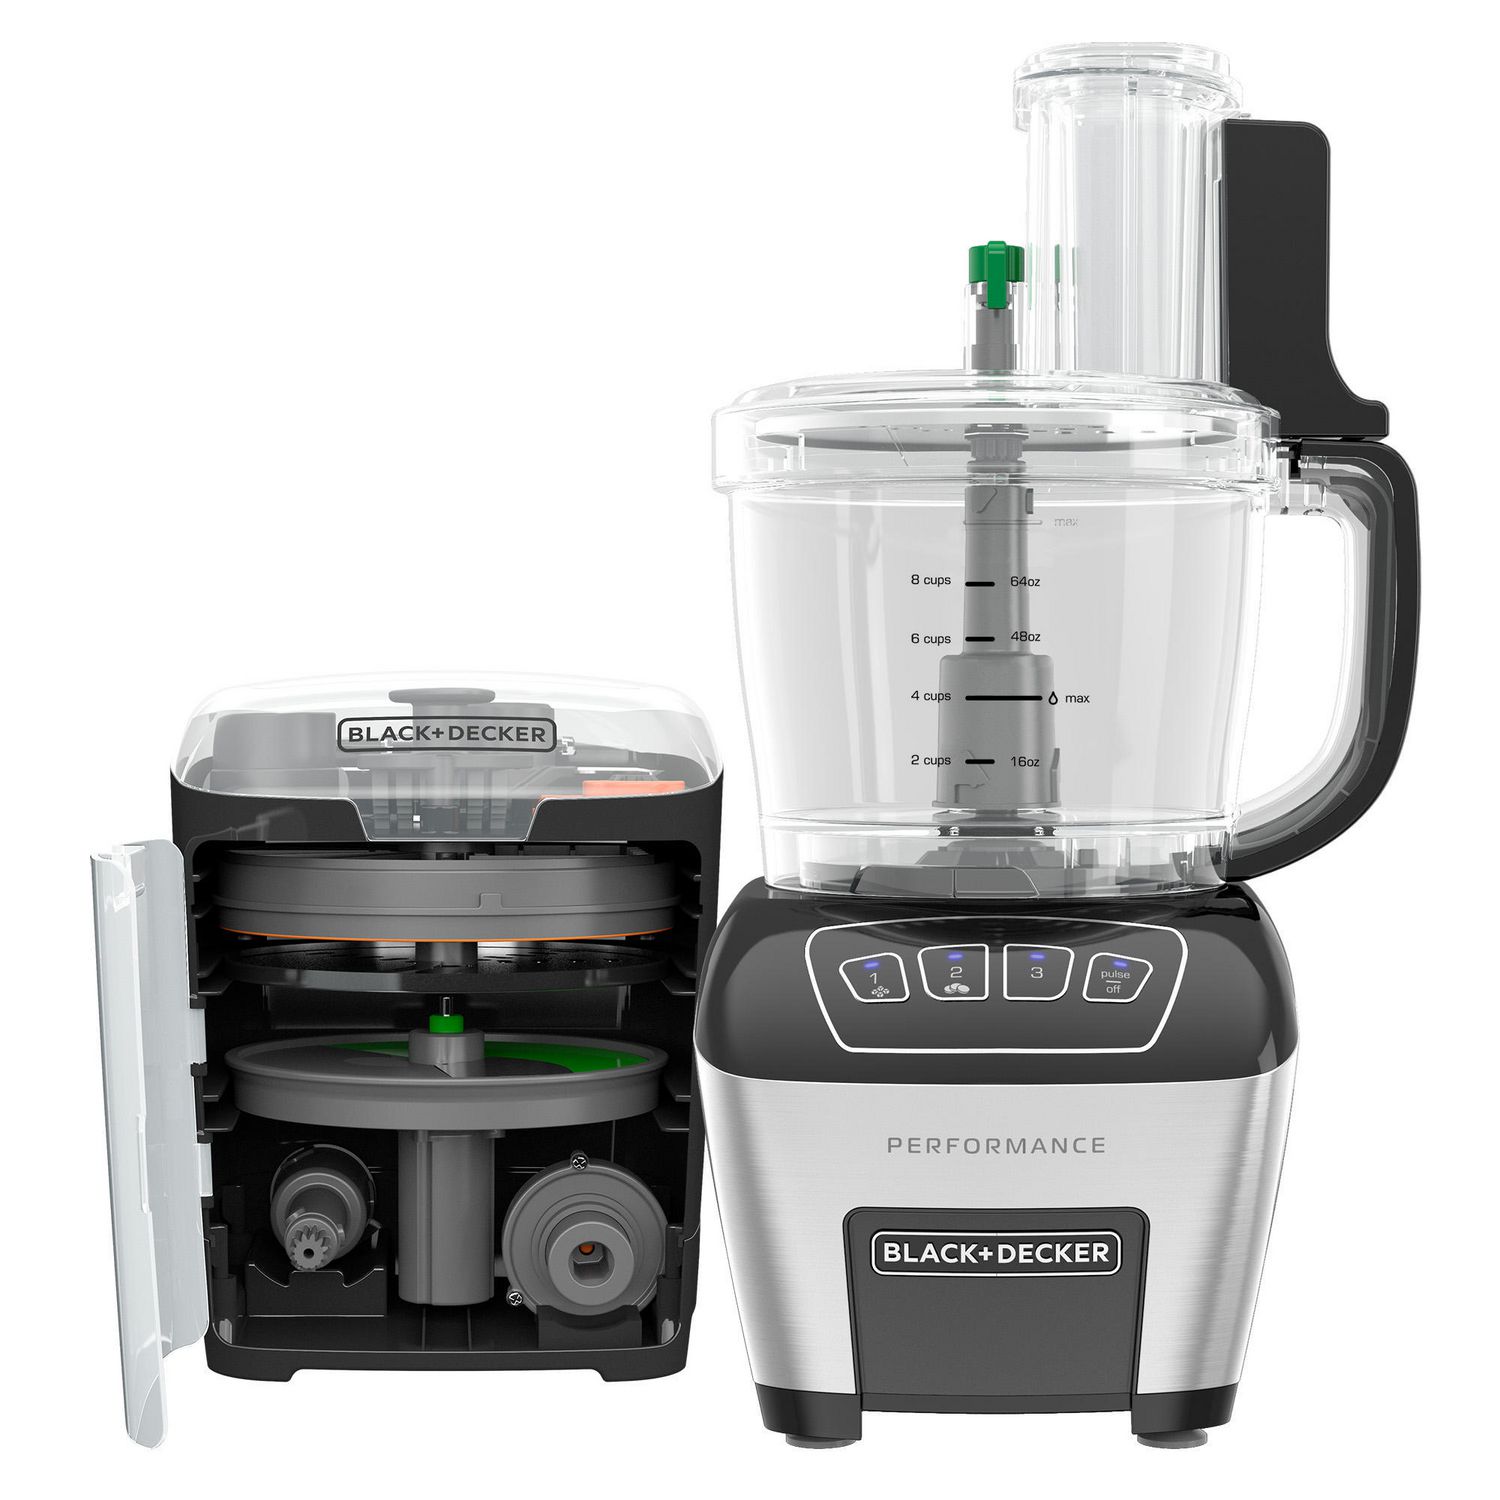 Family-Friendly Functionality: The Convenience of the BLACK+DECKER FP6010 Performance Dicing Food Processor